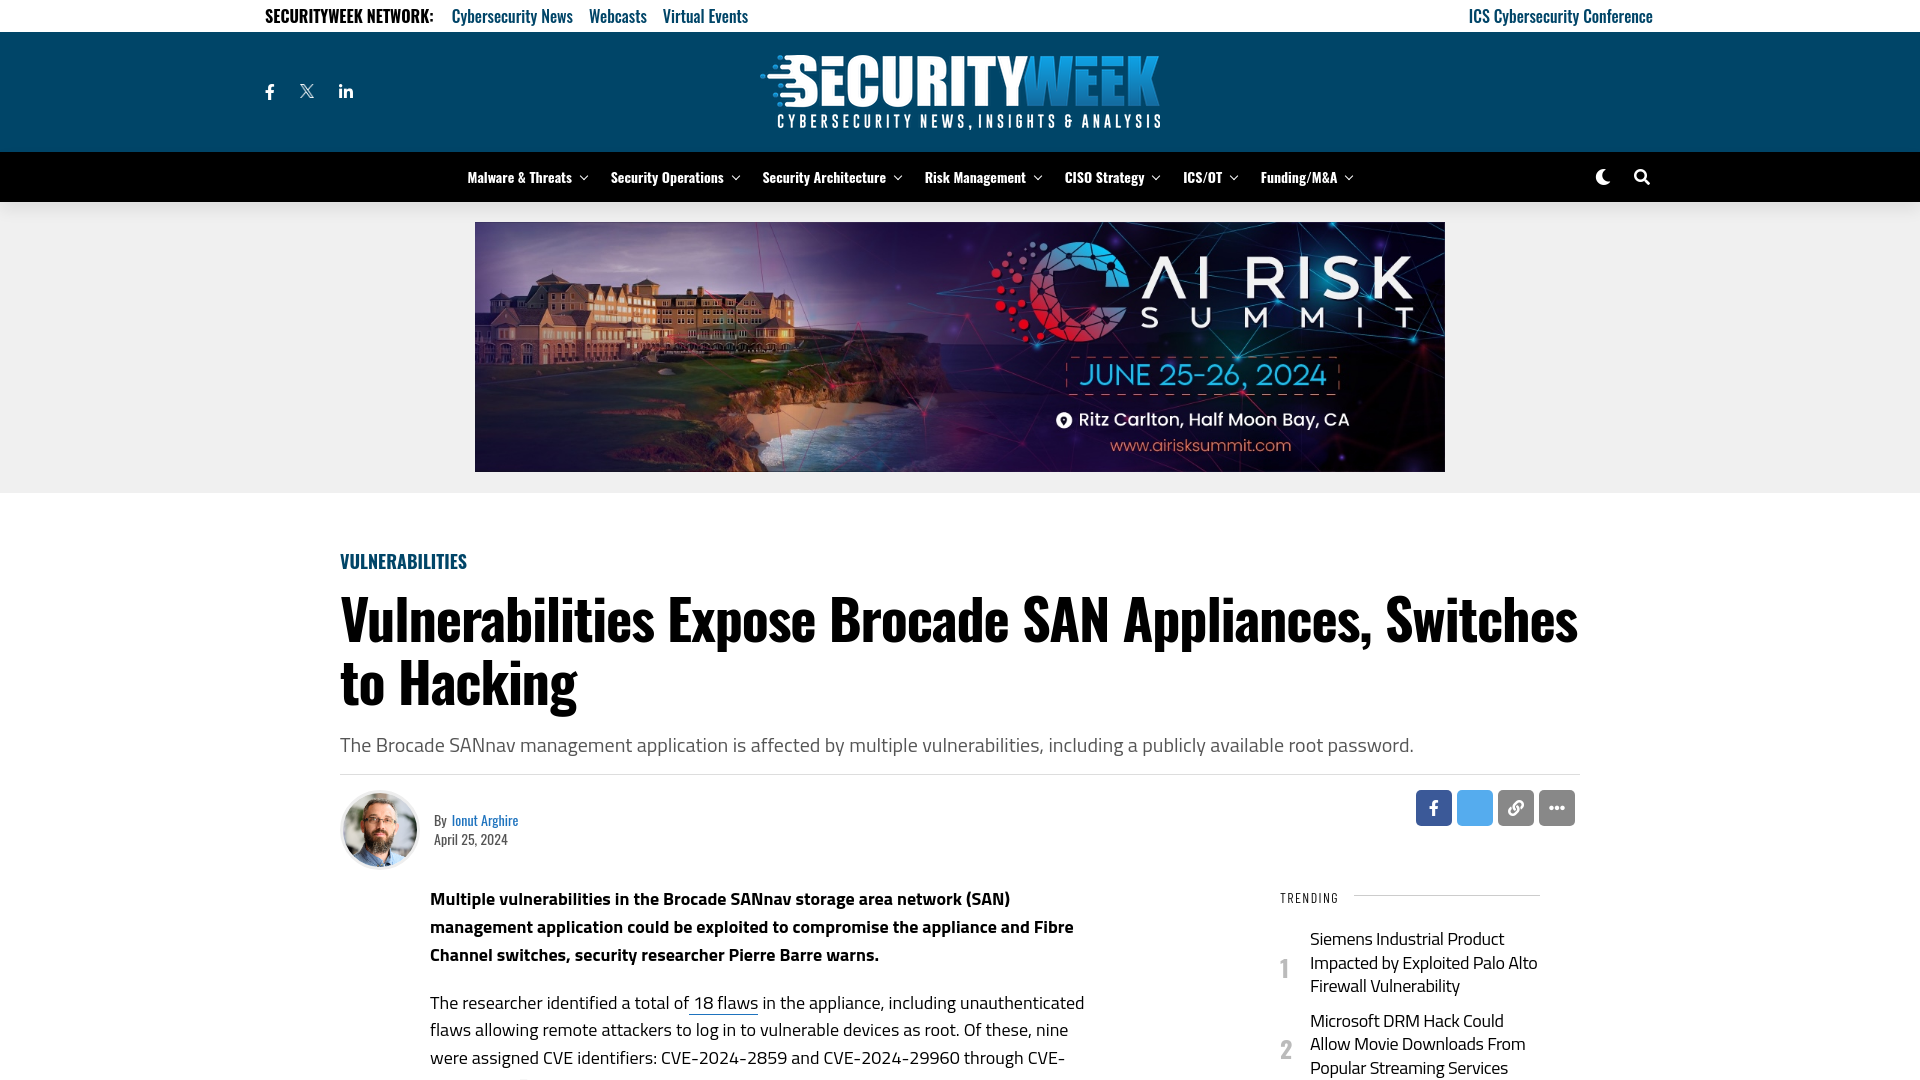 Vulnerabilities Expose Brocade SAN Appliances, Switches to Hacking - SecurityWeek